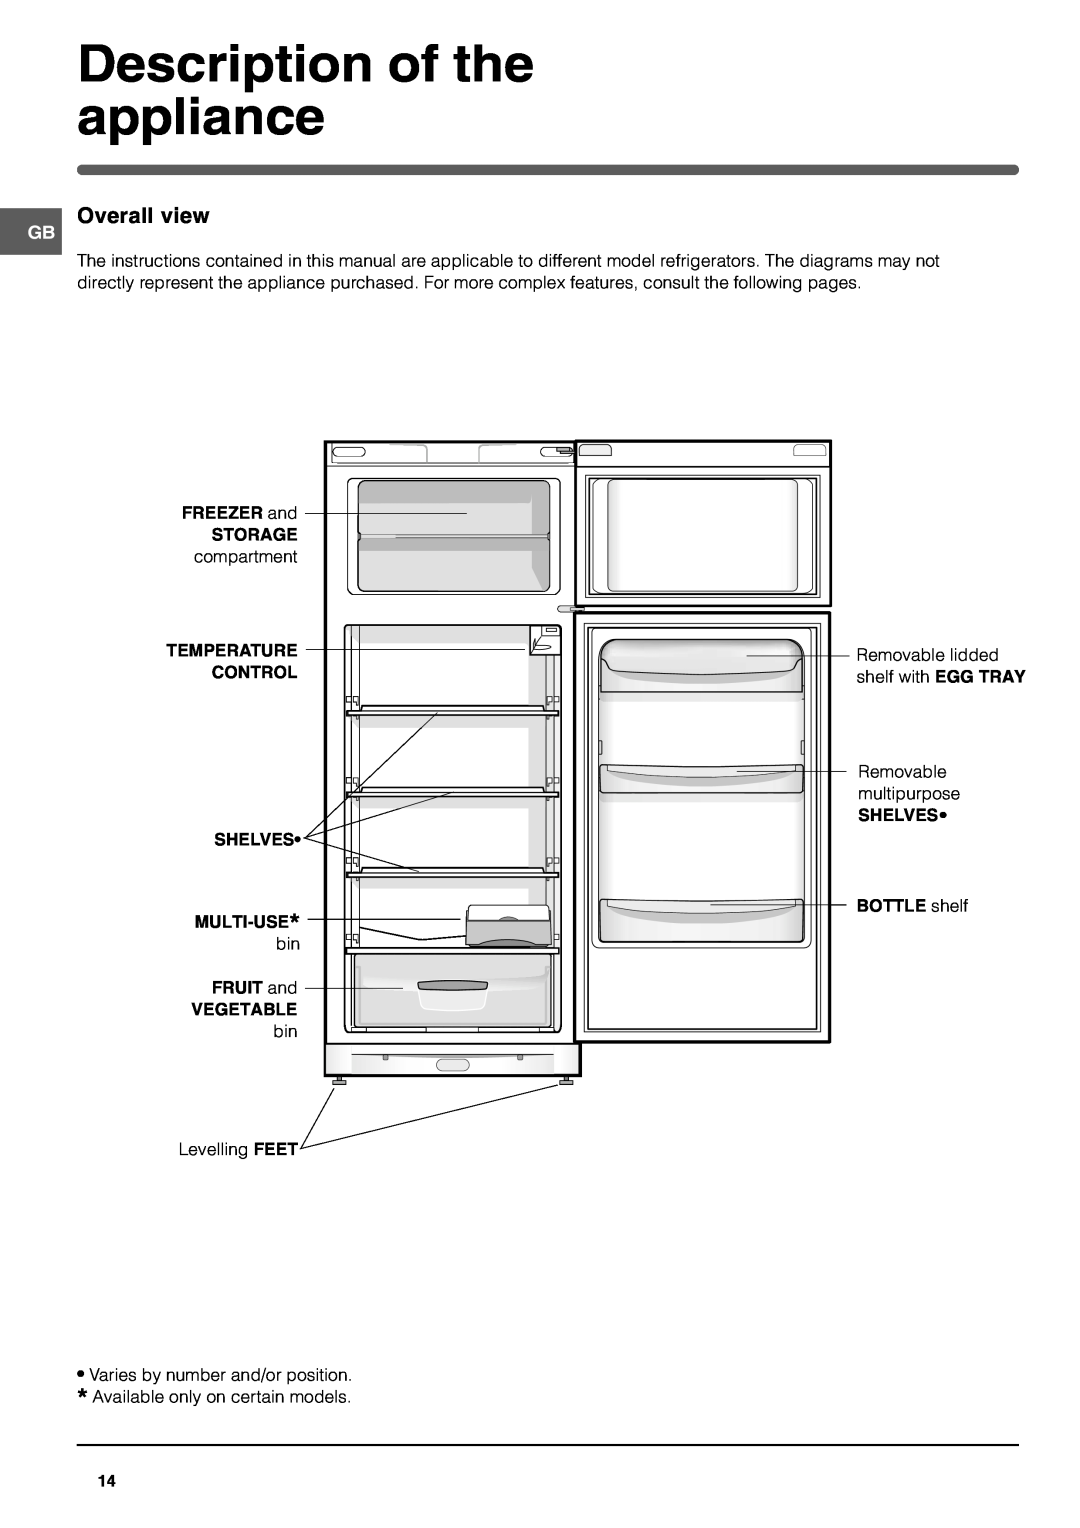 Indesit TAAN 25 operating instructions Description of the appliance, Overall view, Multi-Use, Vegetable, BOTTLE shelf 